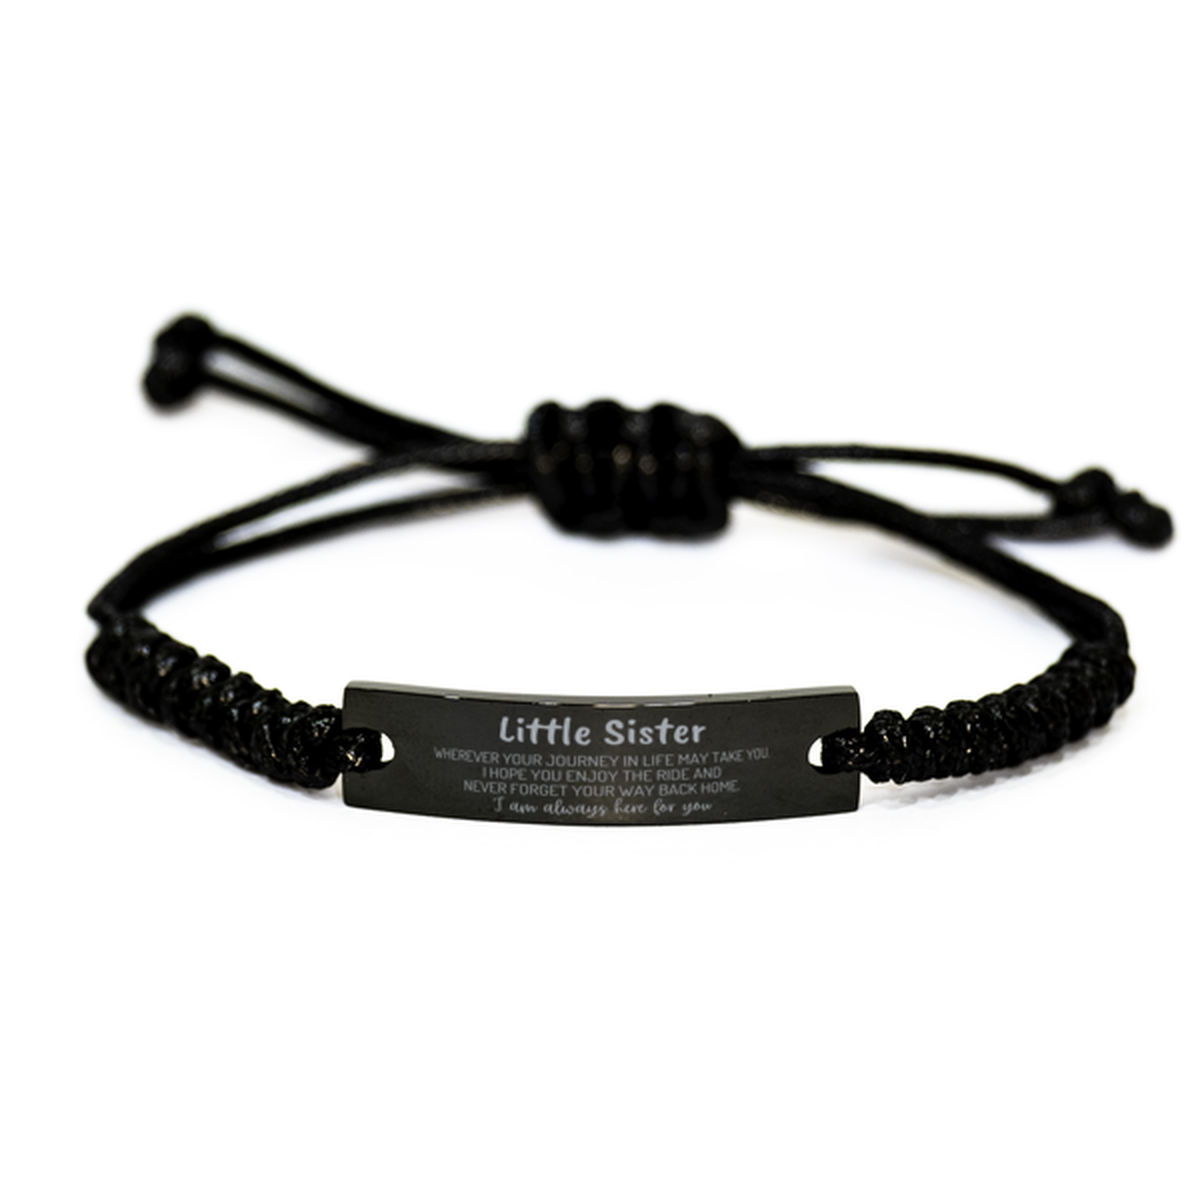 Little Sister wherever your journey in life may take you, I am always here for you Little Sister Black Rope Bracelet, Awesome Christmas Gifts For Little Sister, Little Sister Birthday Gifts for Men Women Family Loved One